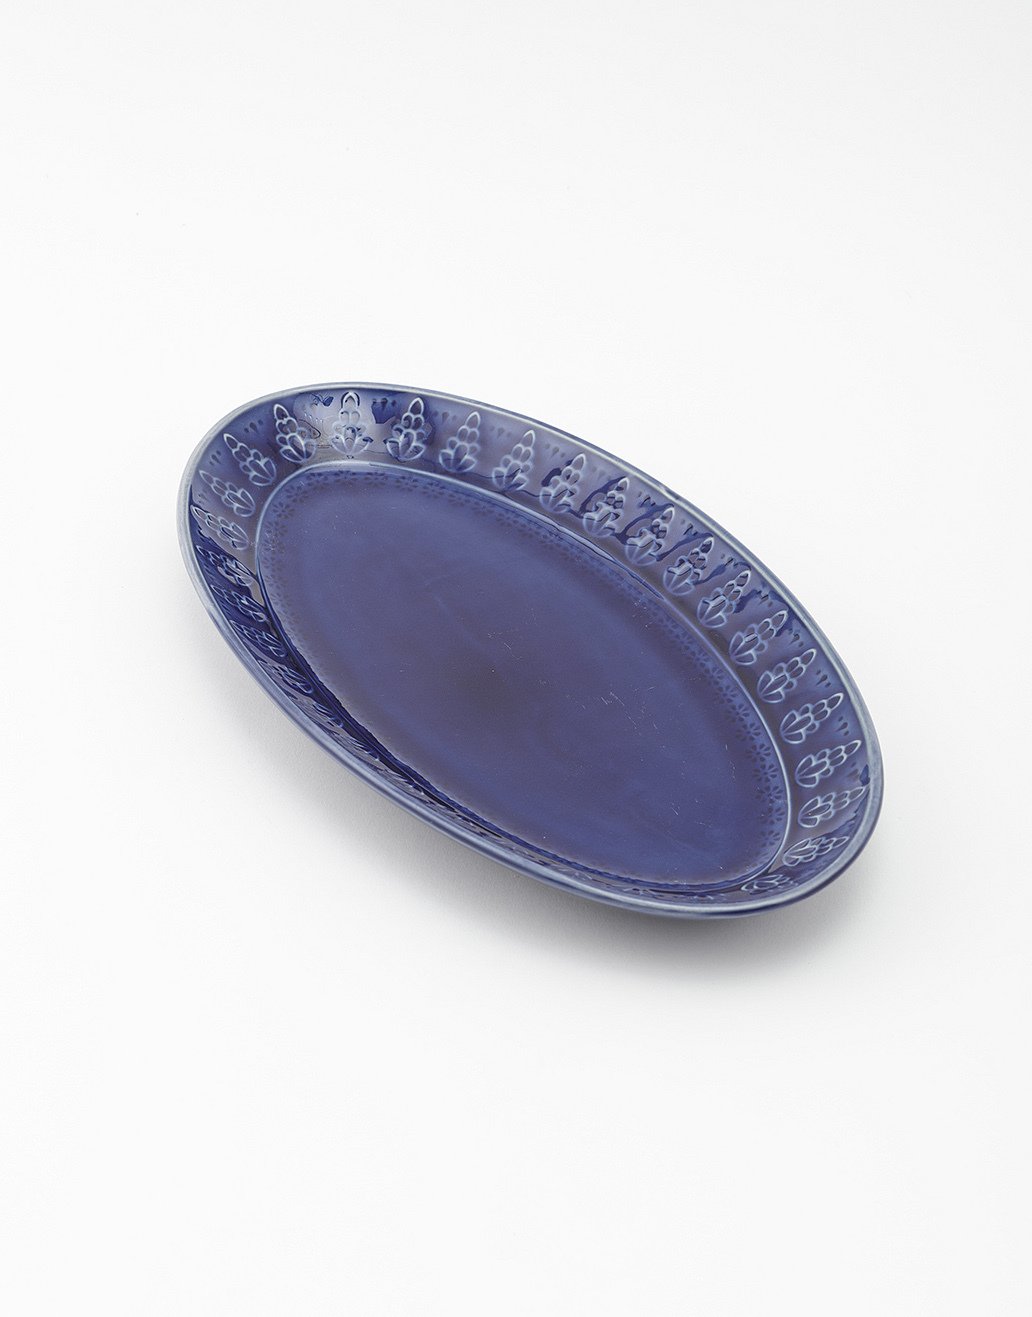 Stoneware oval serving plate Image 1